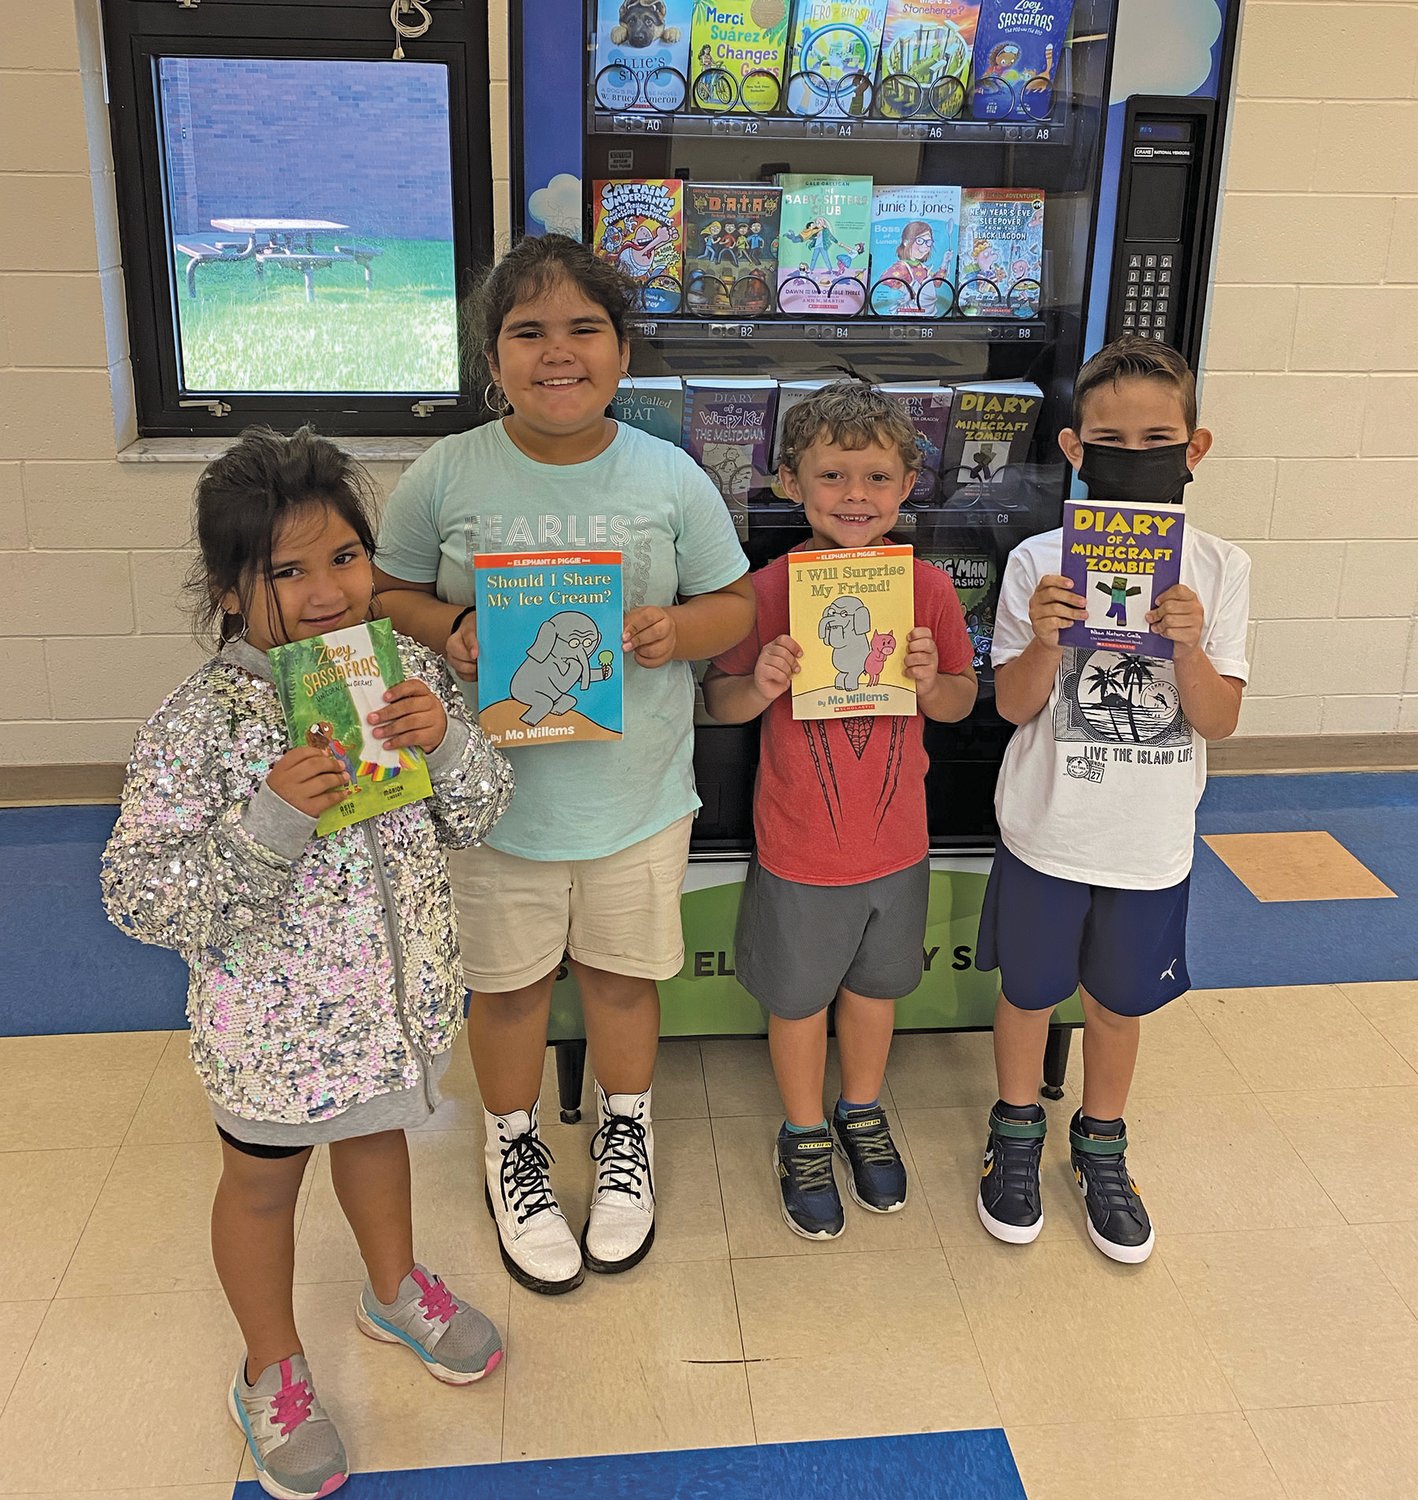 A few of the South Elementary students to reach their AR reading goal hold books they received as rewards from the book vending machine.